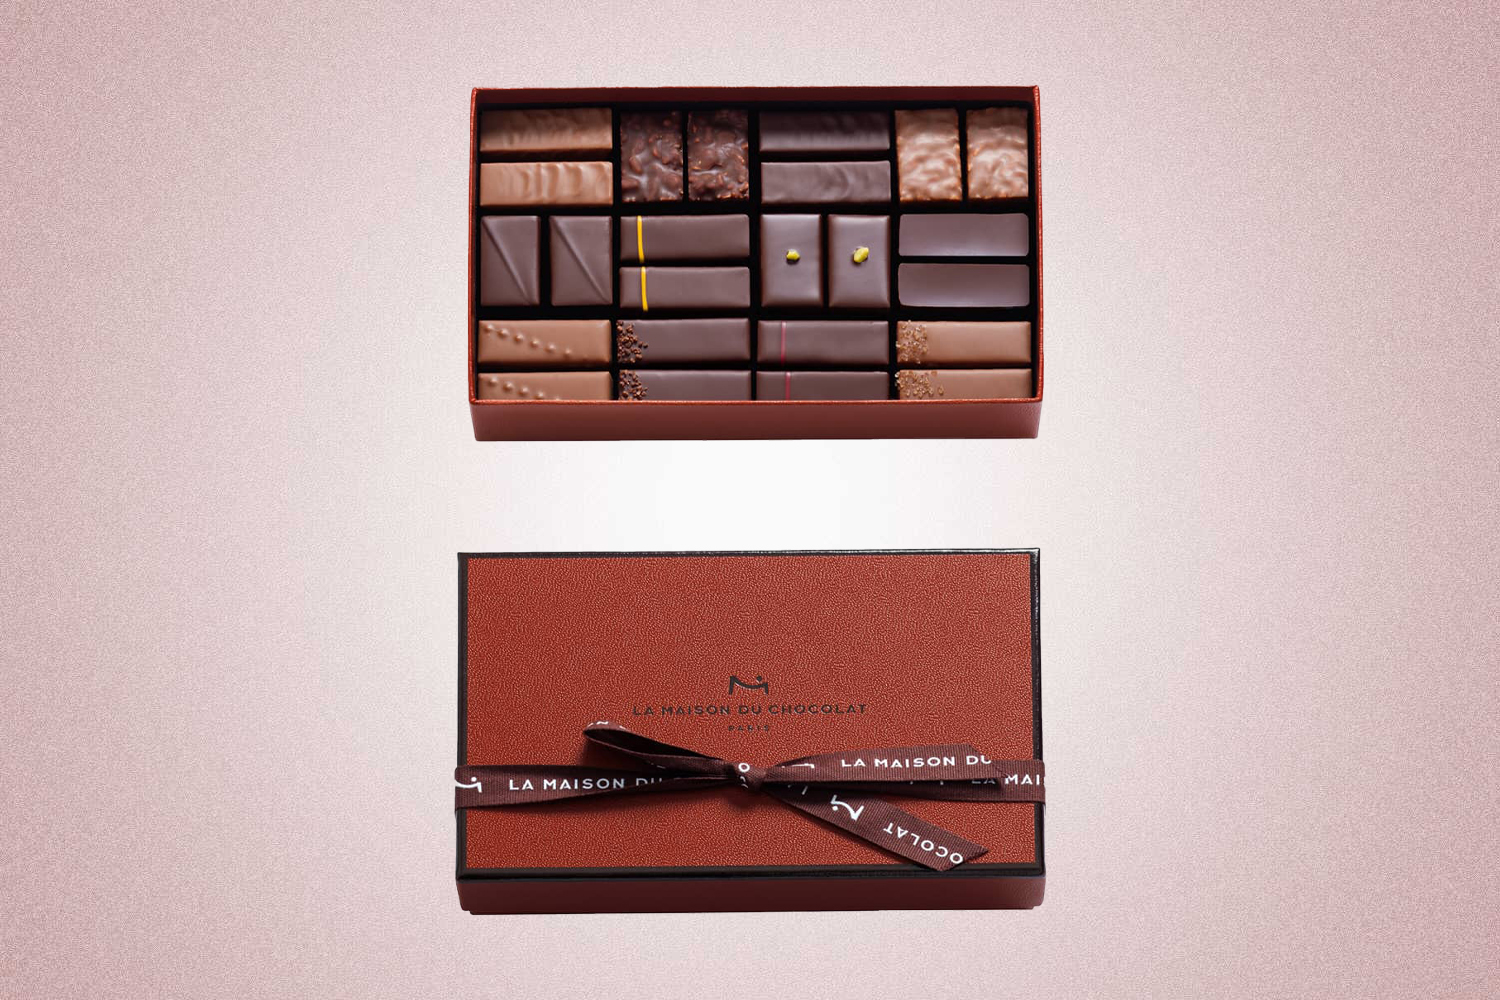 Thr Coffret Maison Dark Chocolate is a rich, delicious chocolate gift for Valentine's Day in 2022